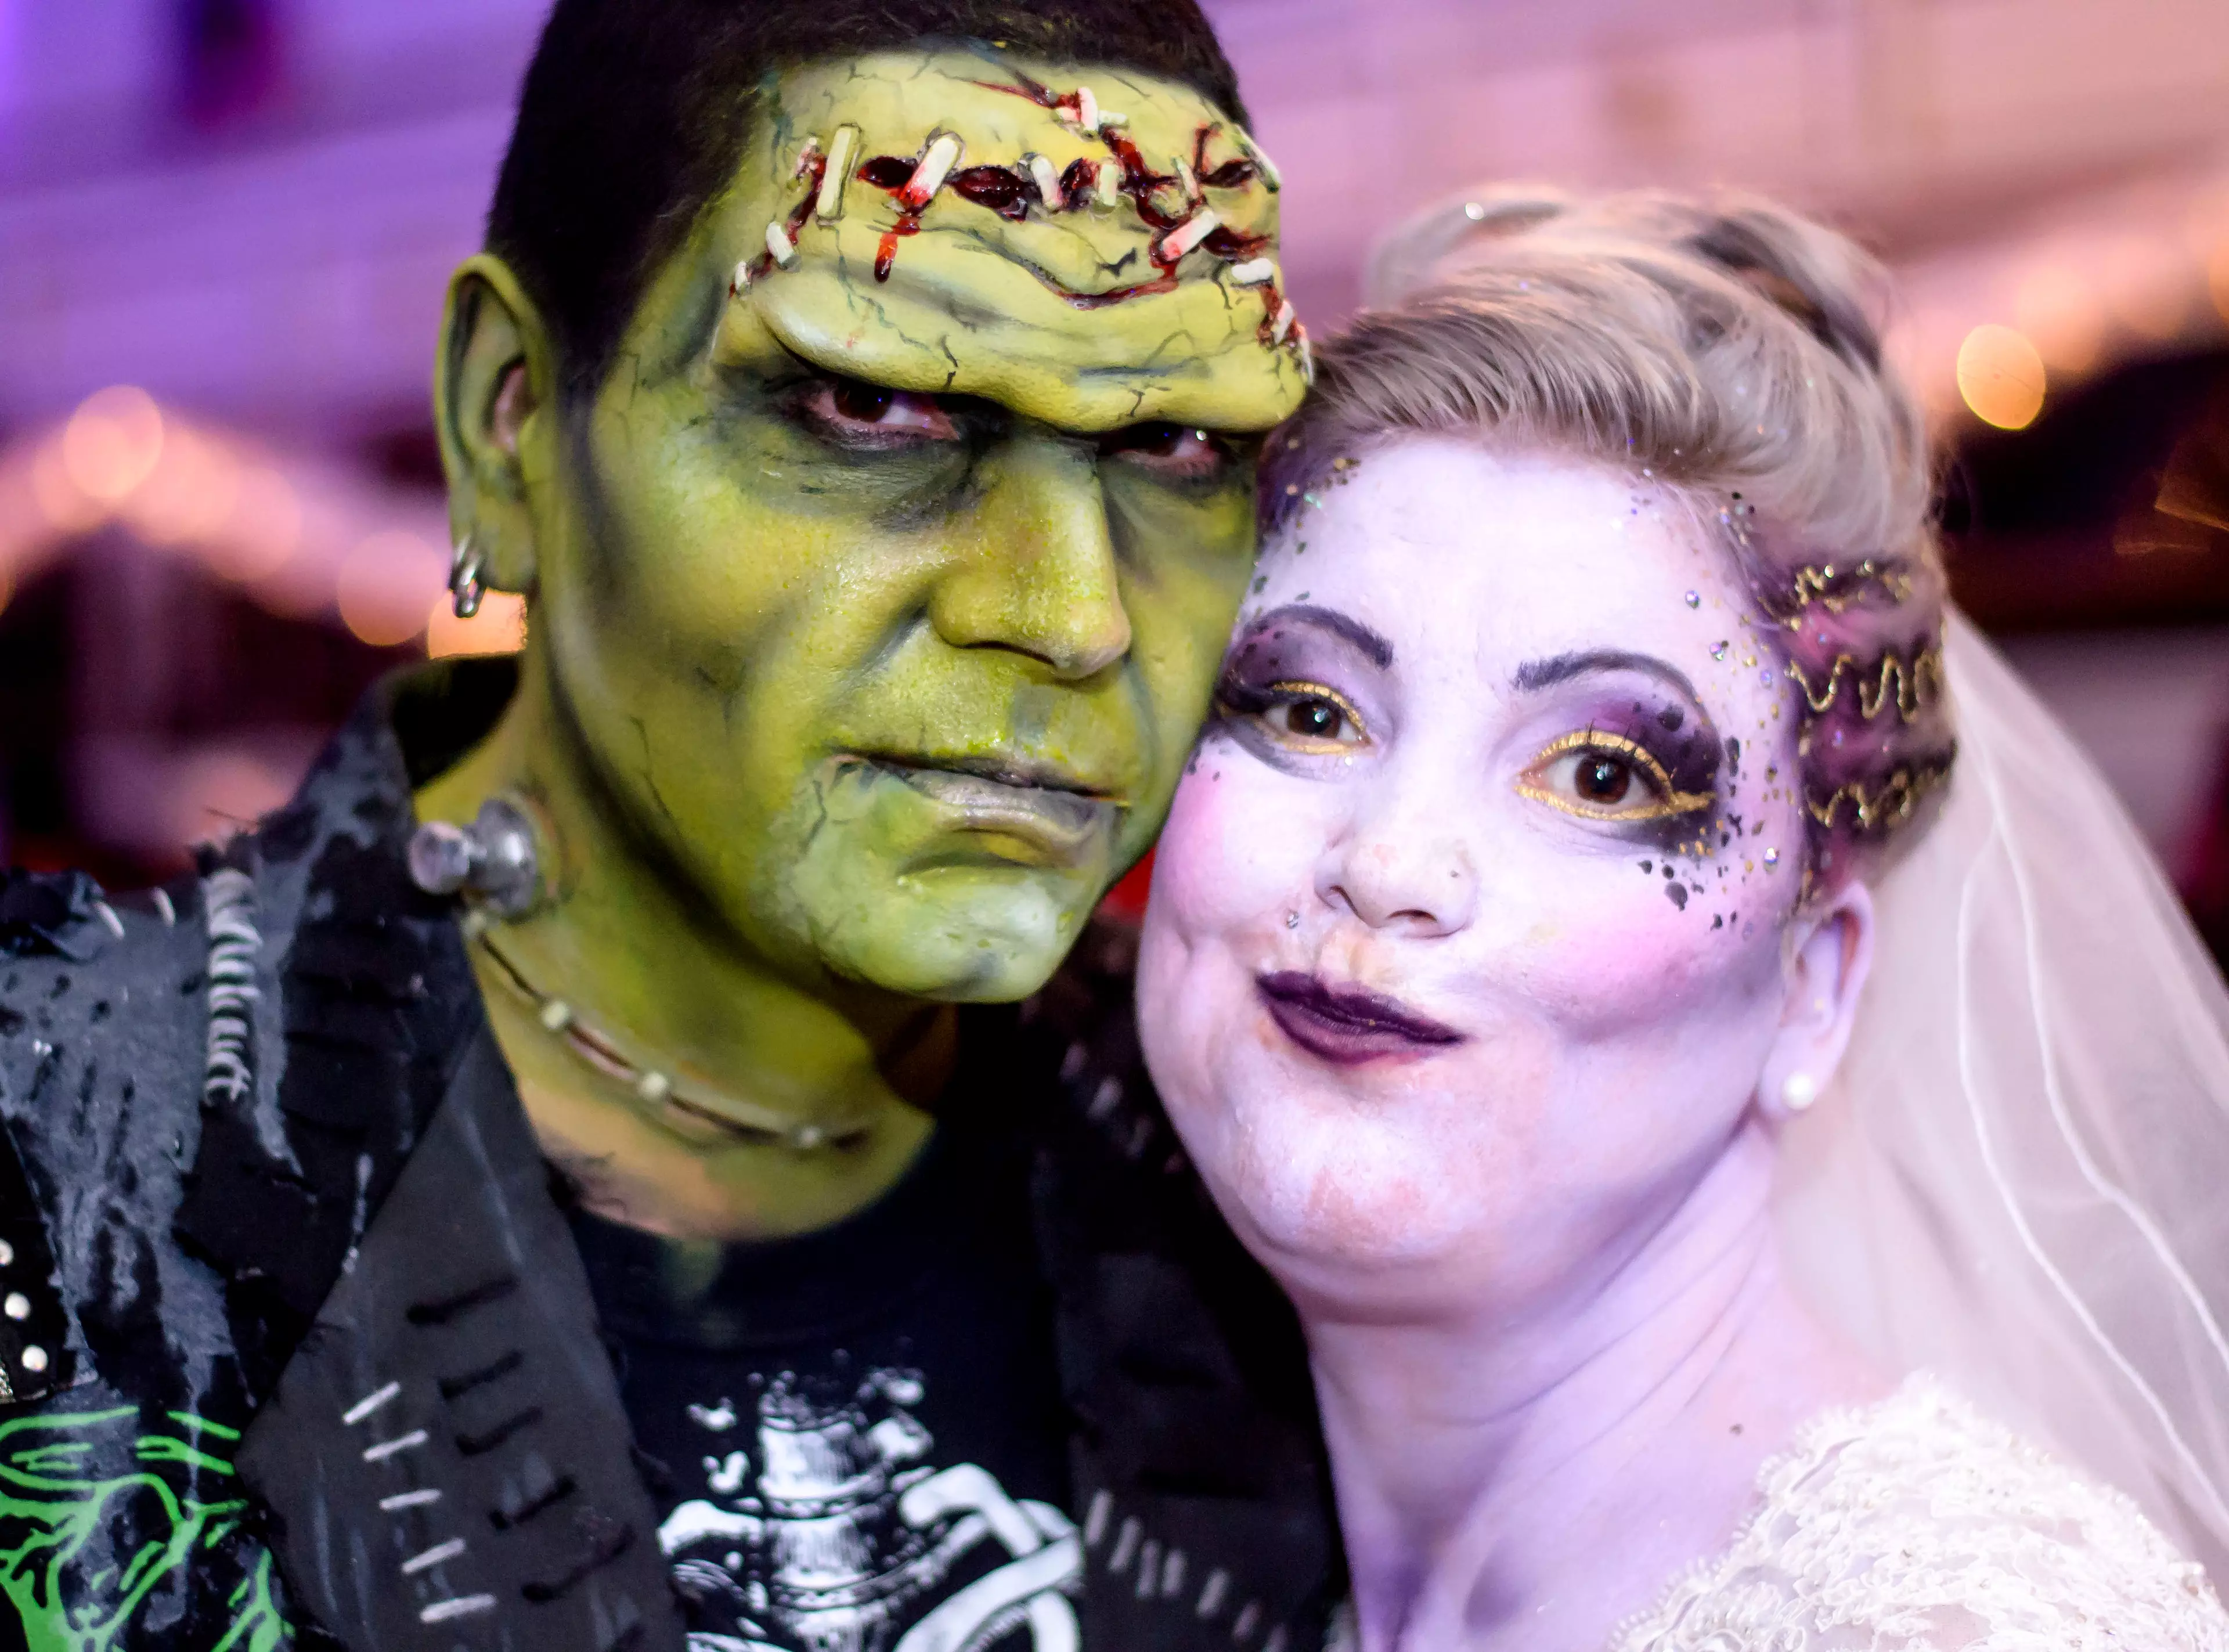 Looking their best on her wedding day meant dressing up as Frankenstein and his bride for this couple. (